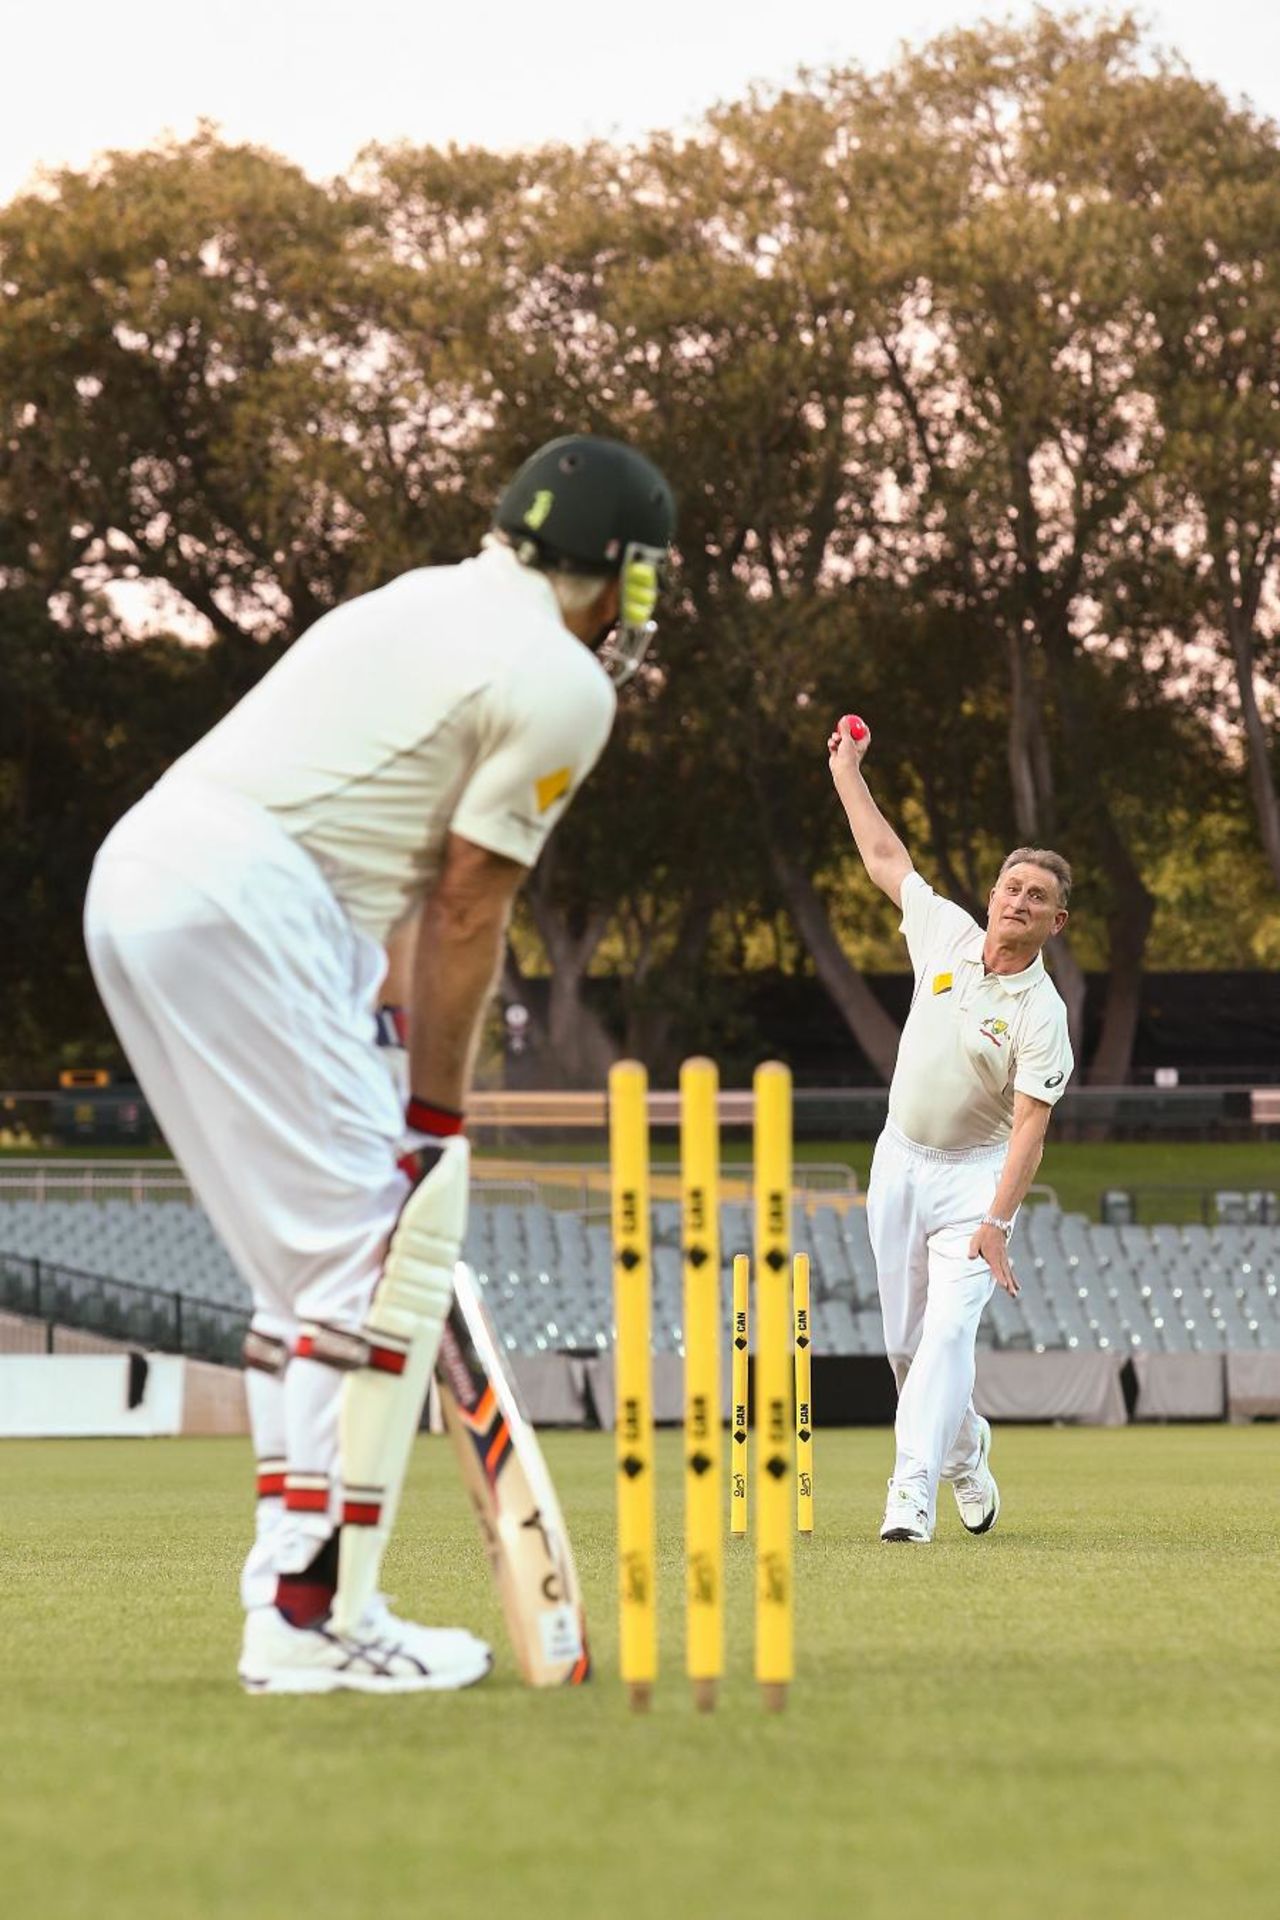 Len Pascoe and Barry Richards at a re-enactment of the first ball bowled under lights, Adelaide Oval, November 24, 2015